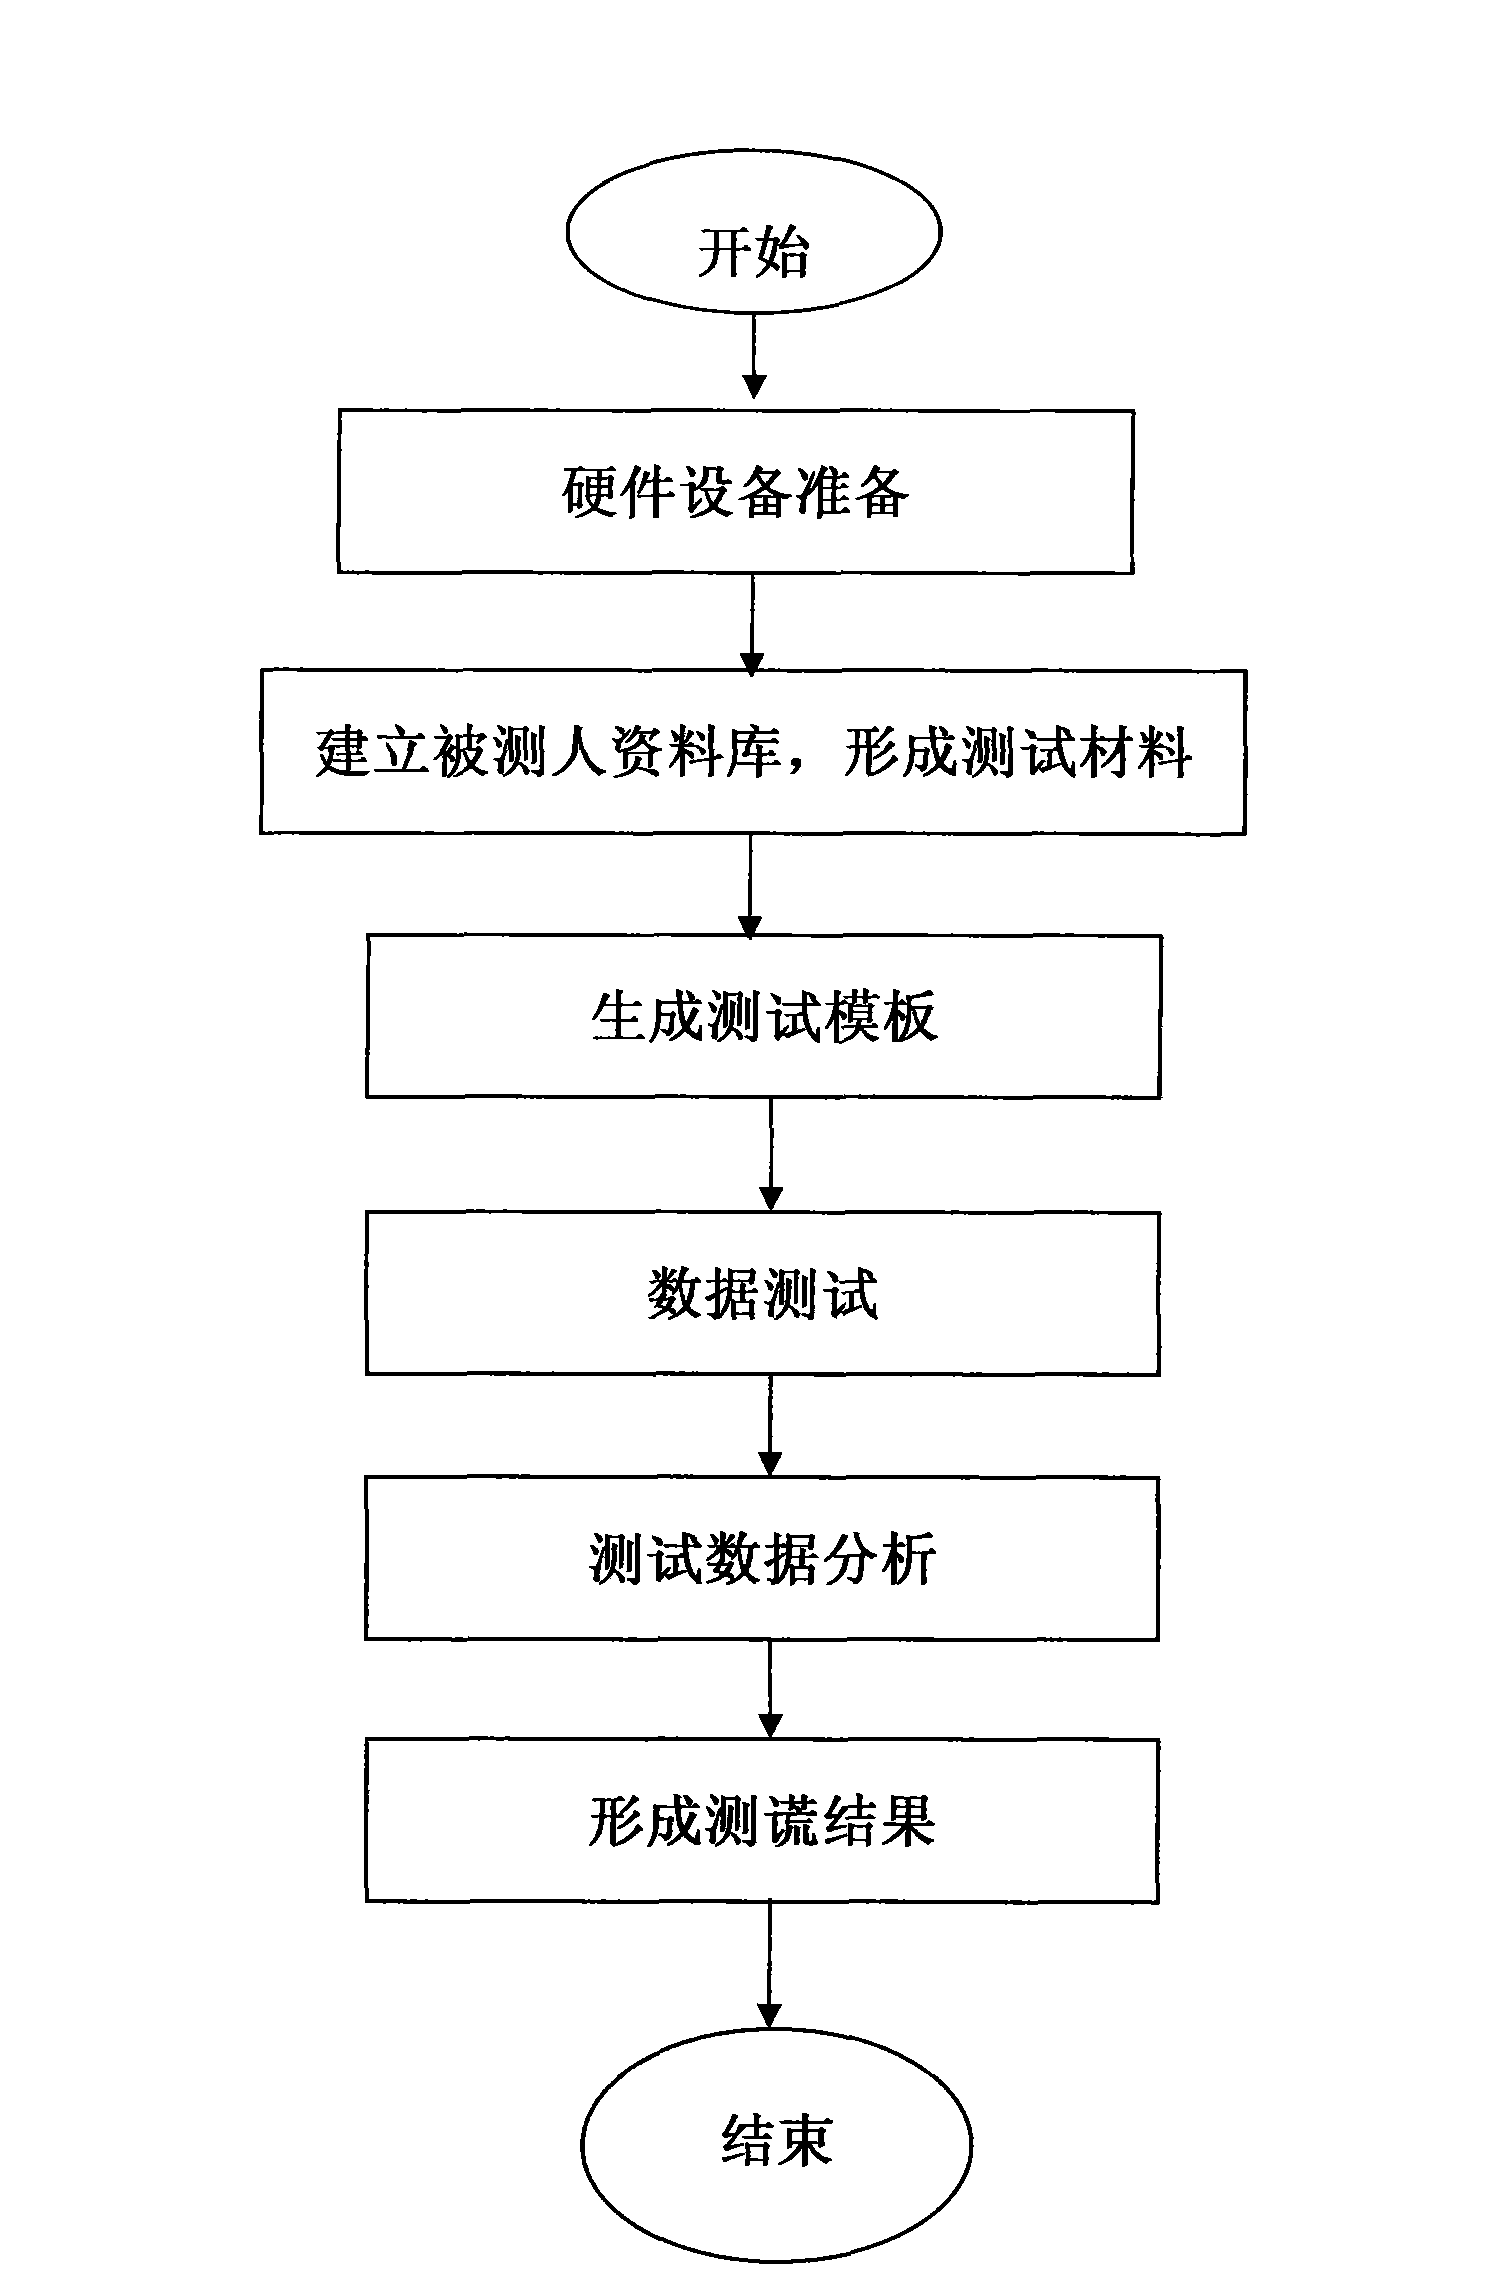 Affair-relative light signal collection analysis system and lie detection method